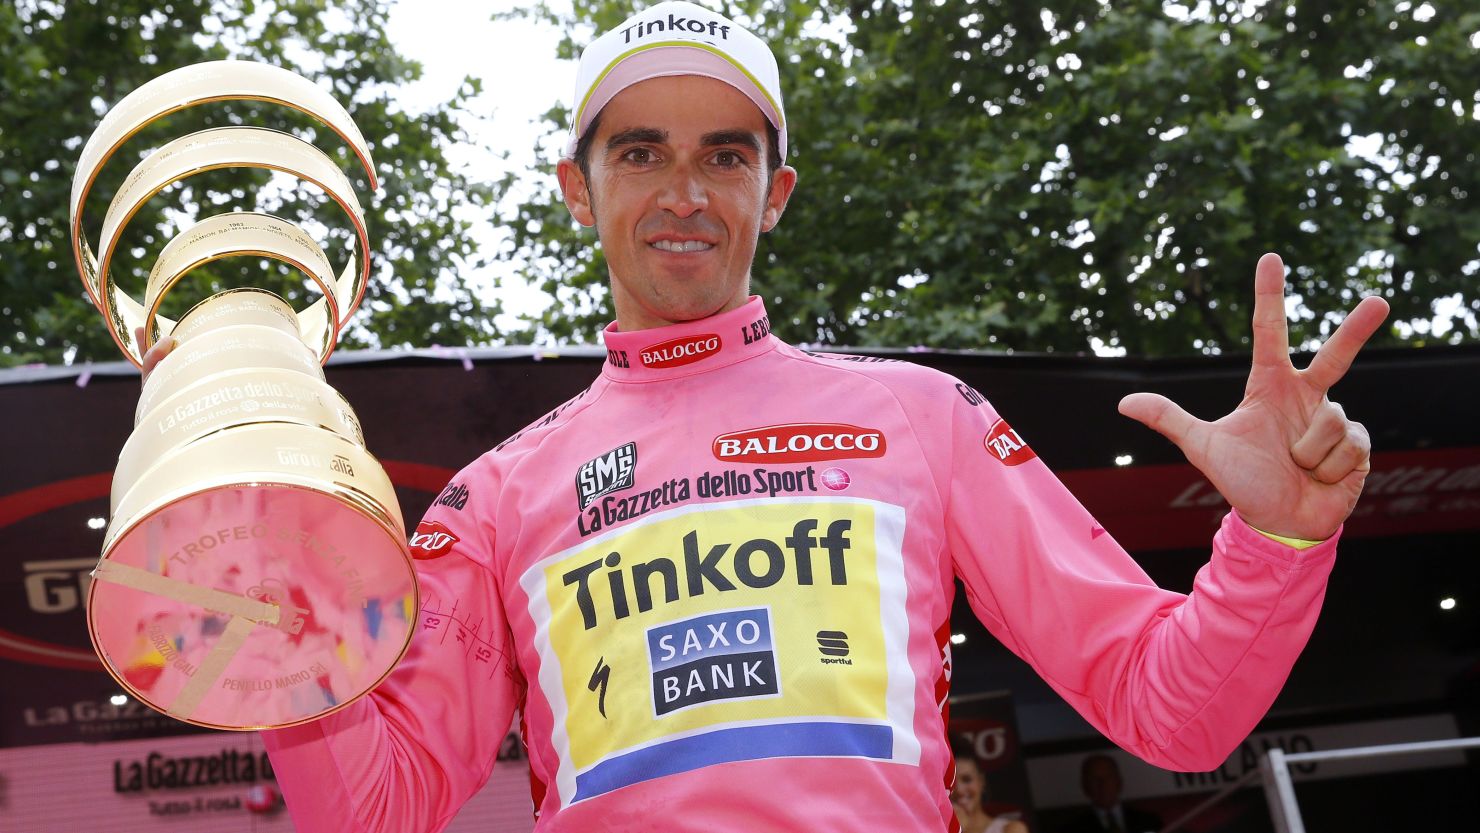 Alberto Contador clutches the winning trophy at the 2015 Giro d'Italia - his second victory in the race.